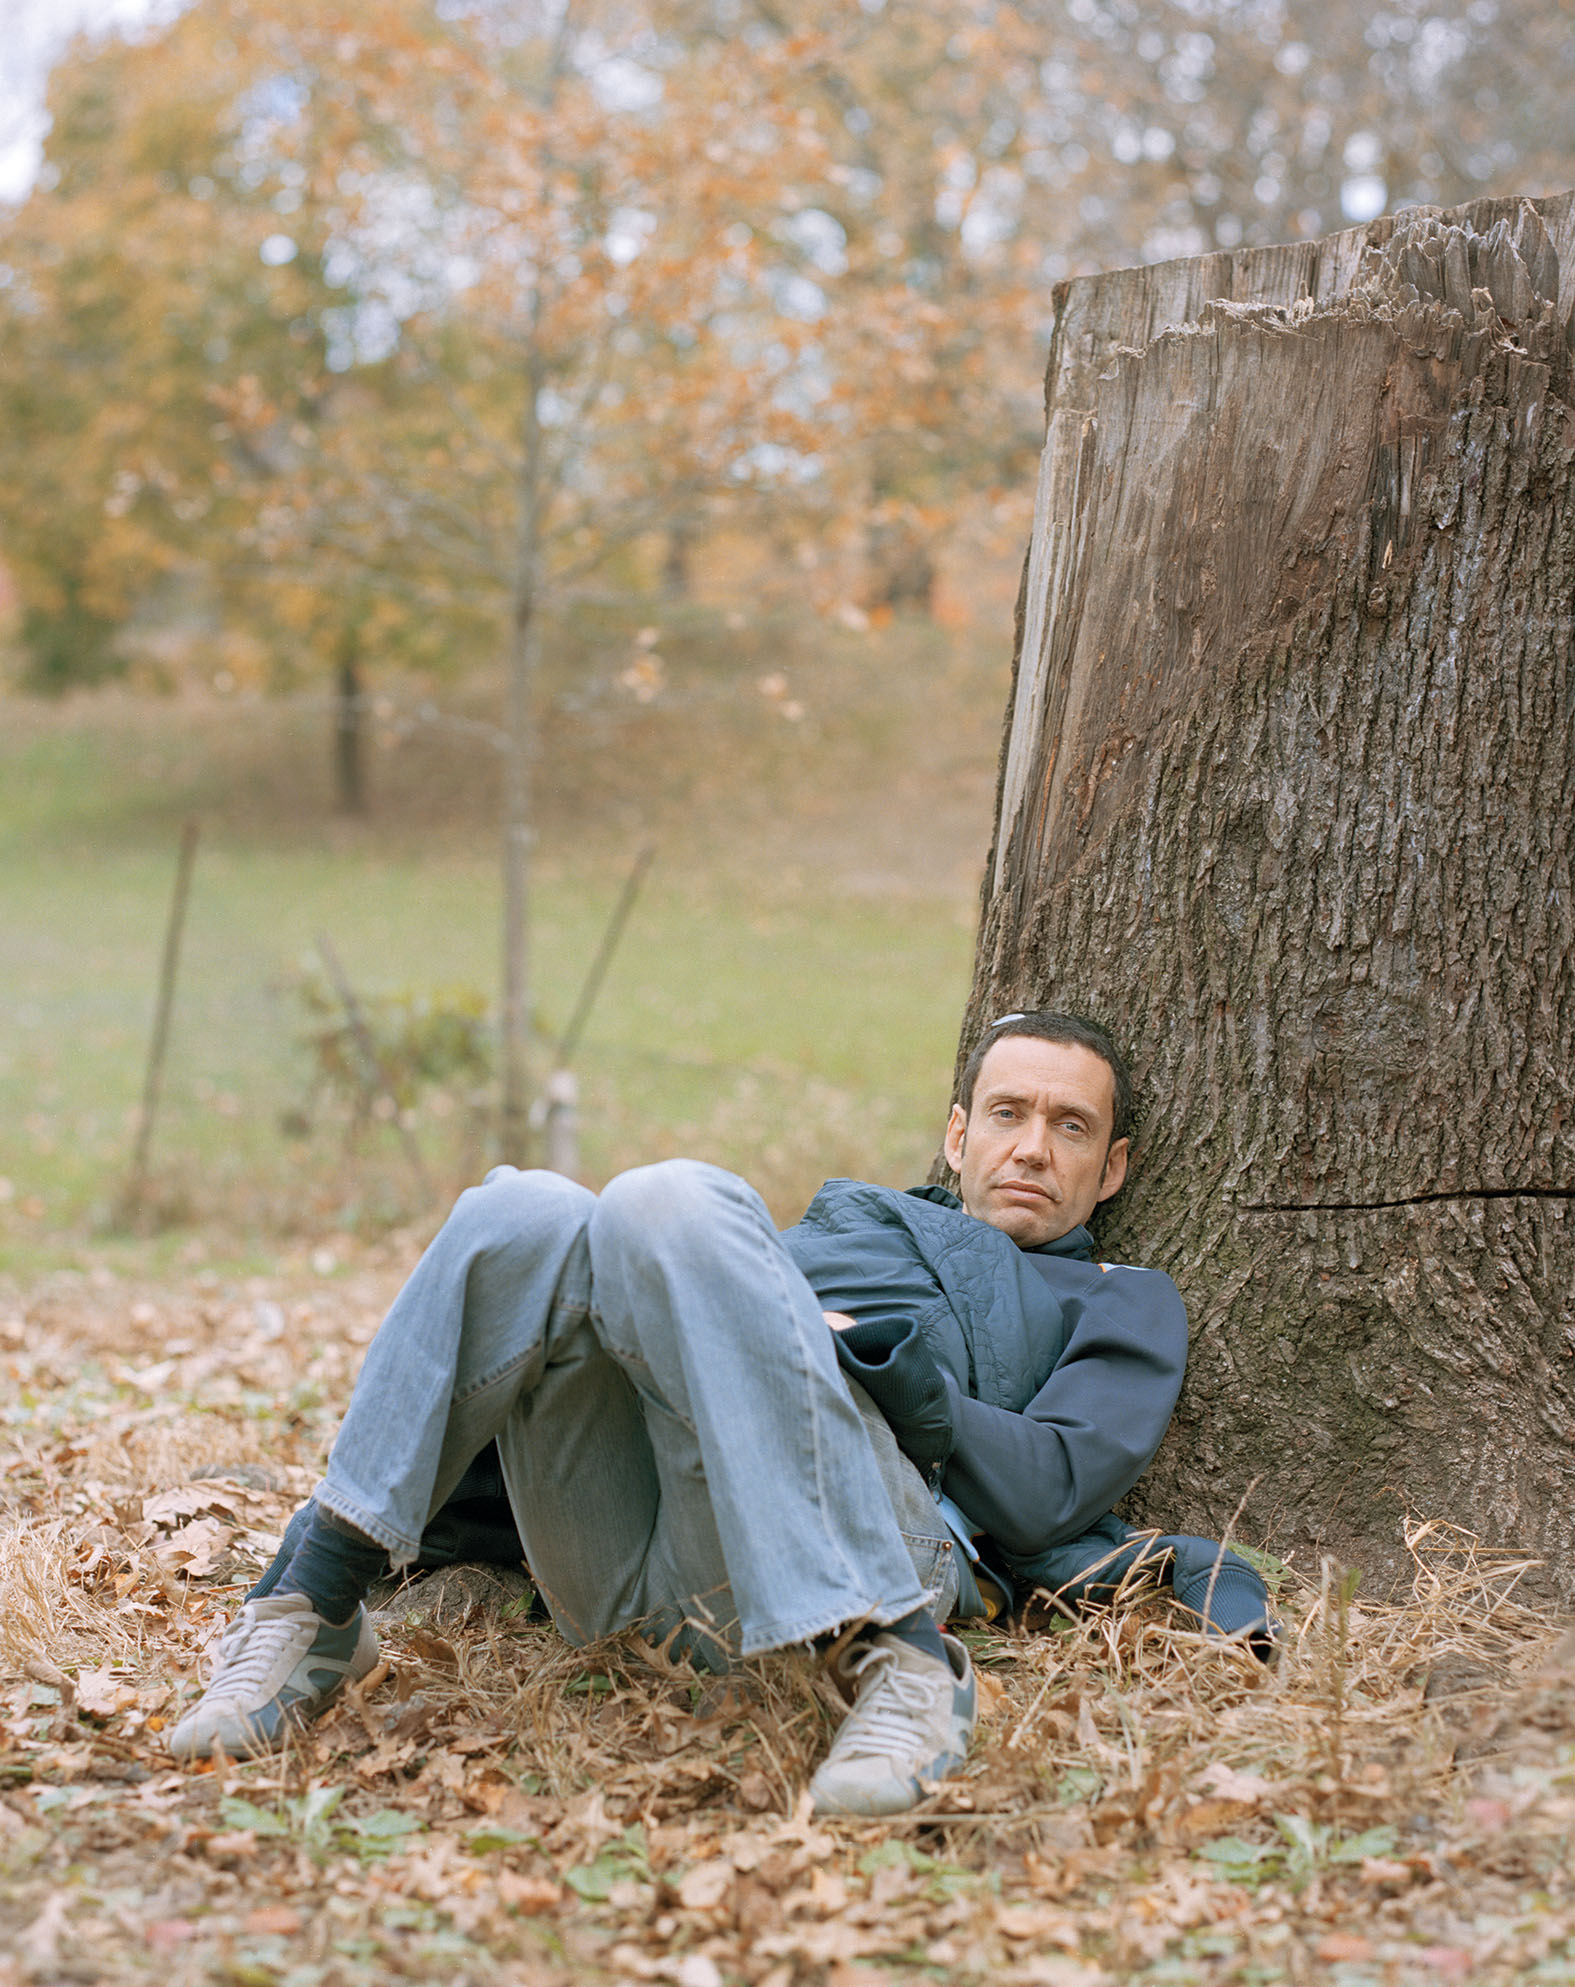 Color photograph of a man in blue jeans and a blue jacket slumped at the base of a tree stump in an autumnal landscape